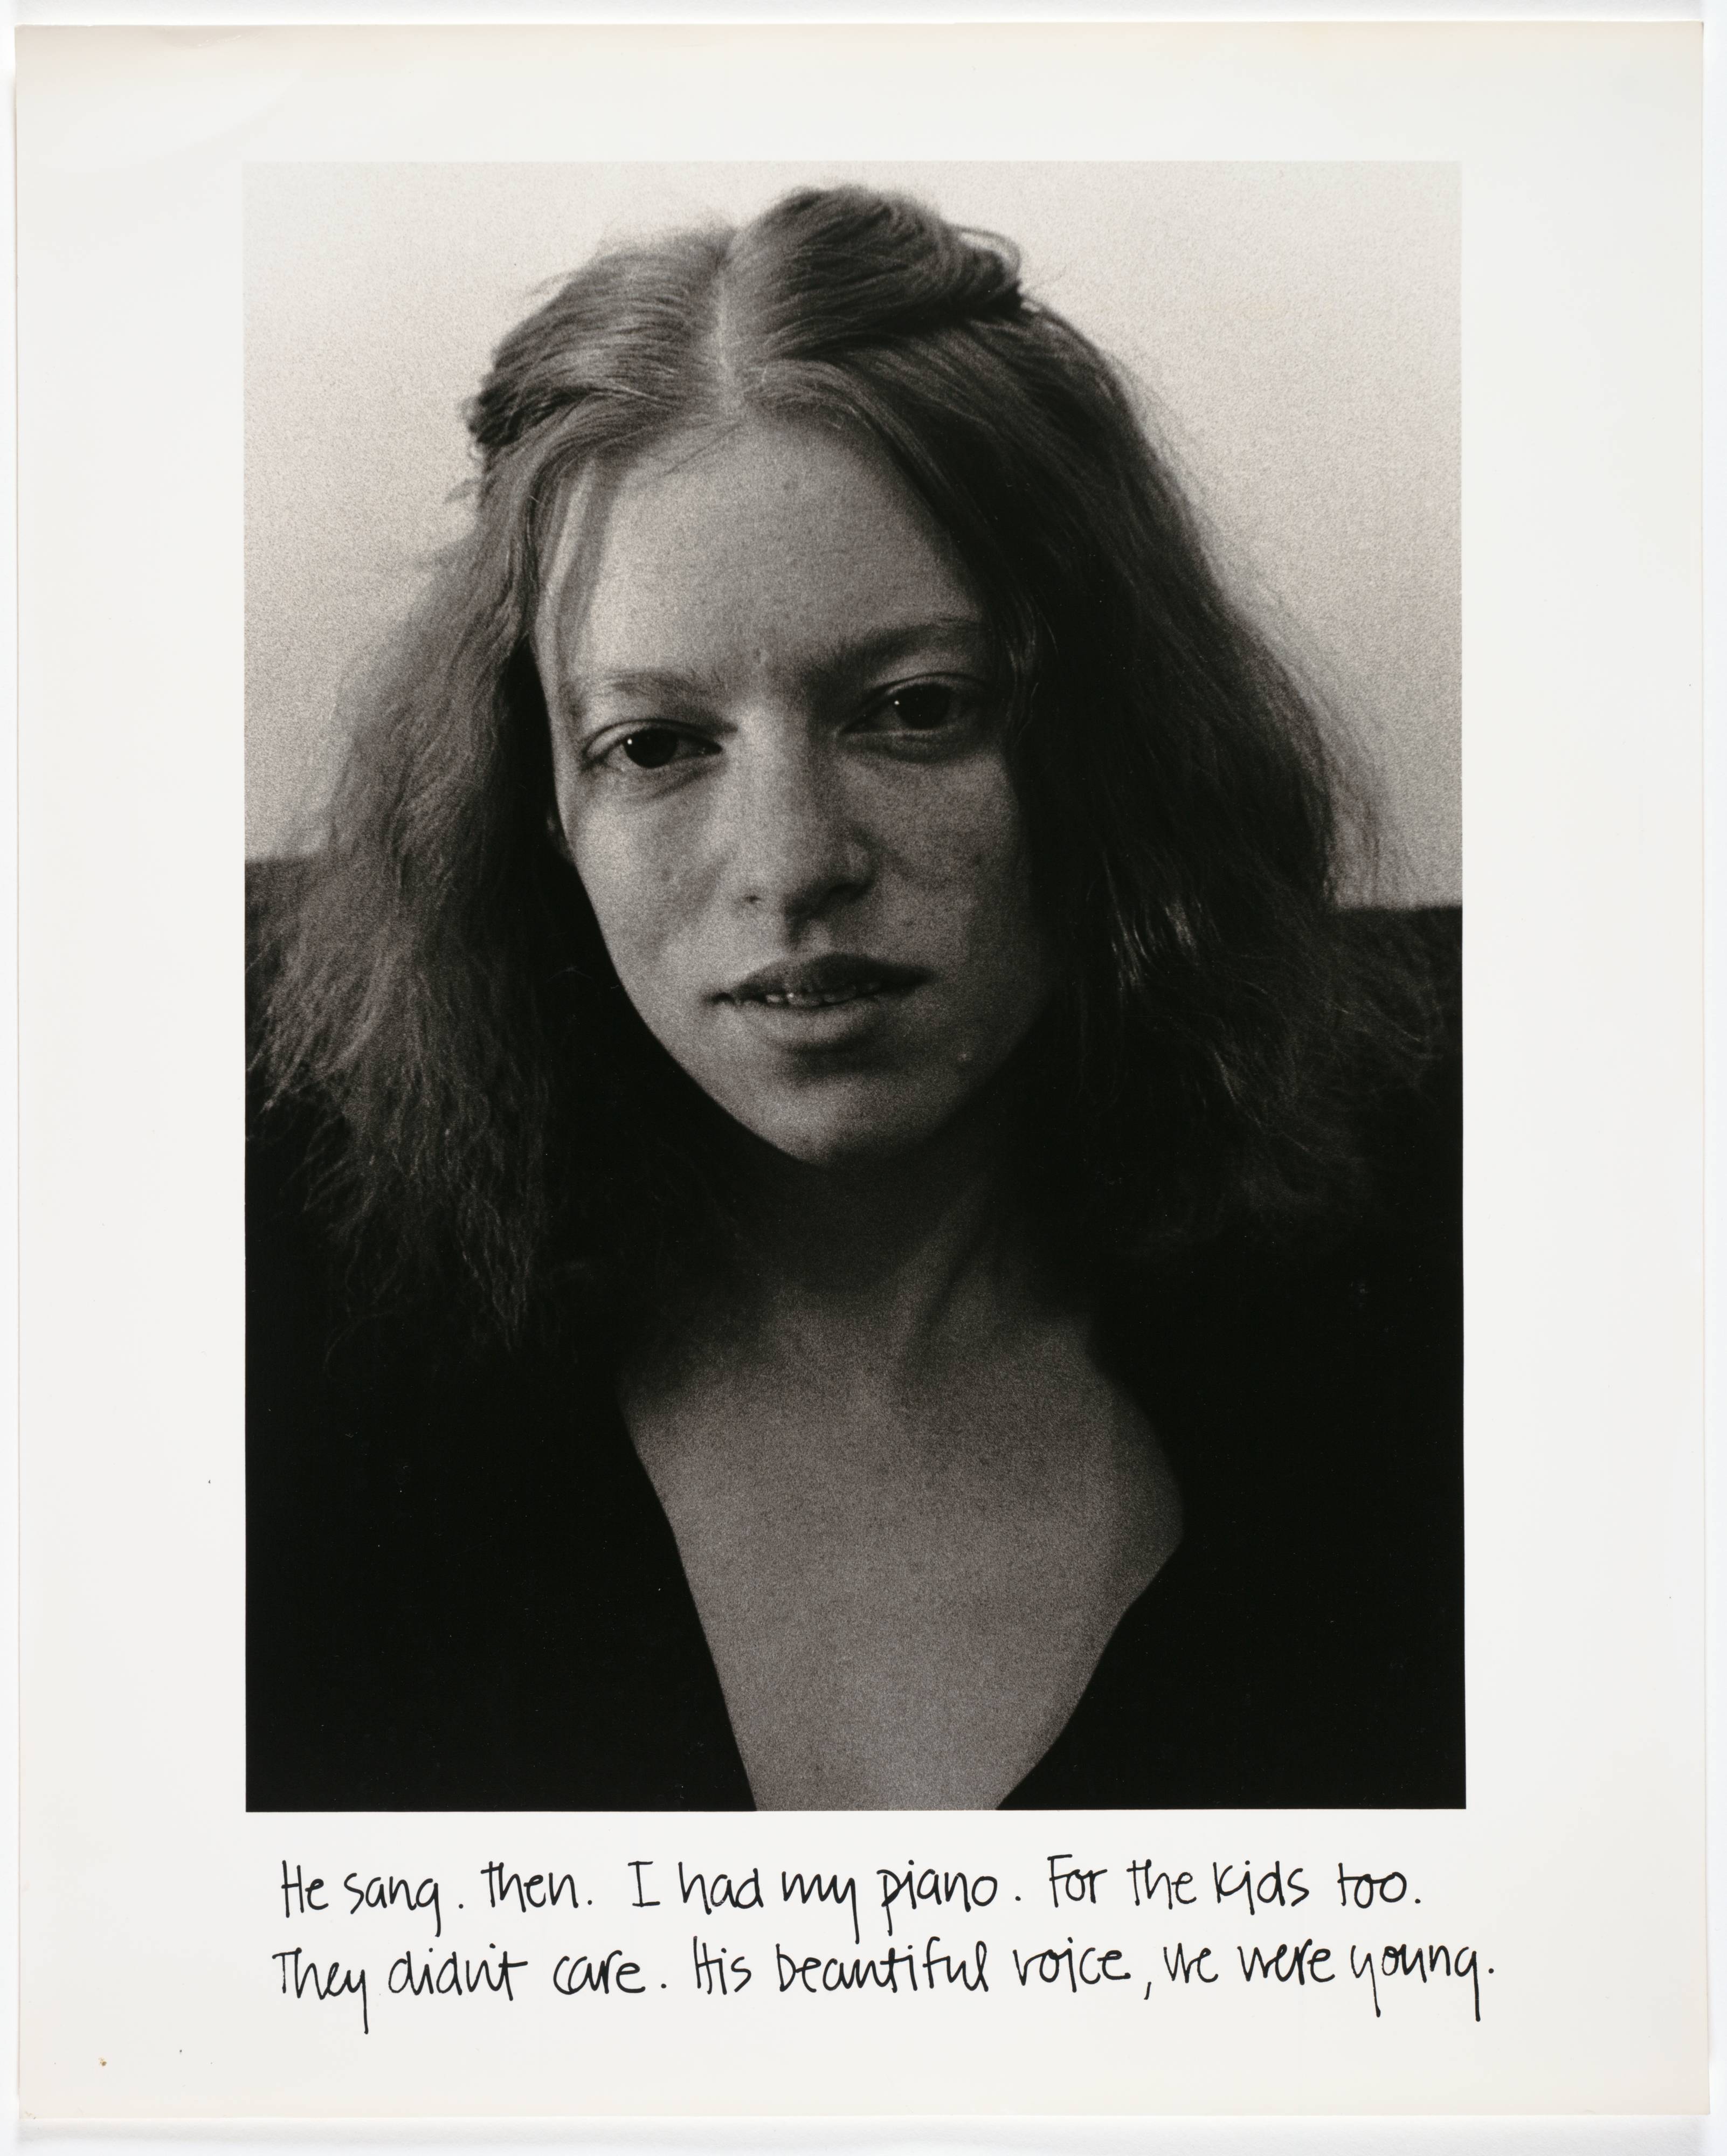 Donna-Lee Phillips, If it weren't for the photographs..., 1977 · SFMOMA